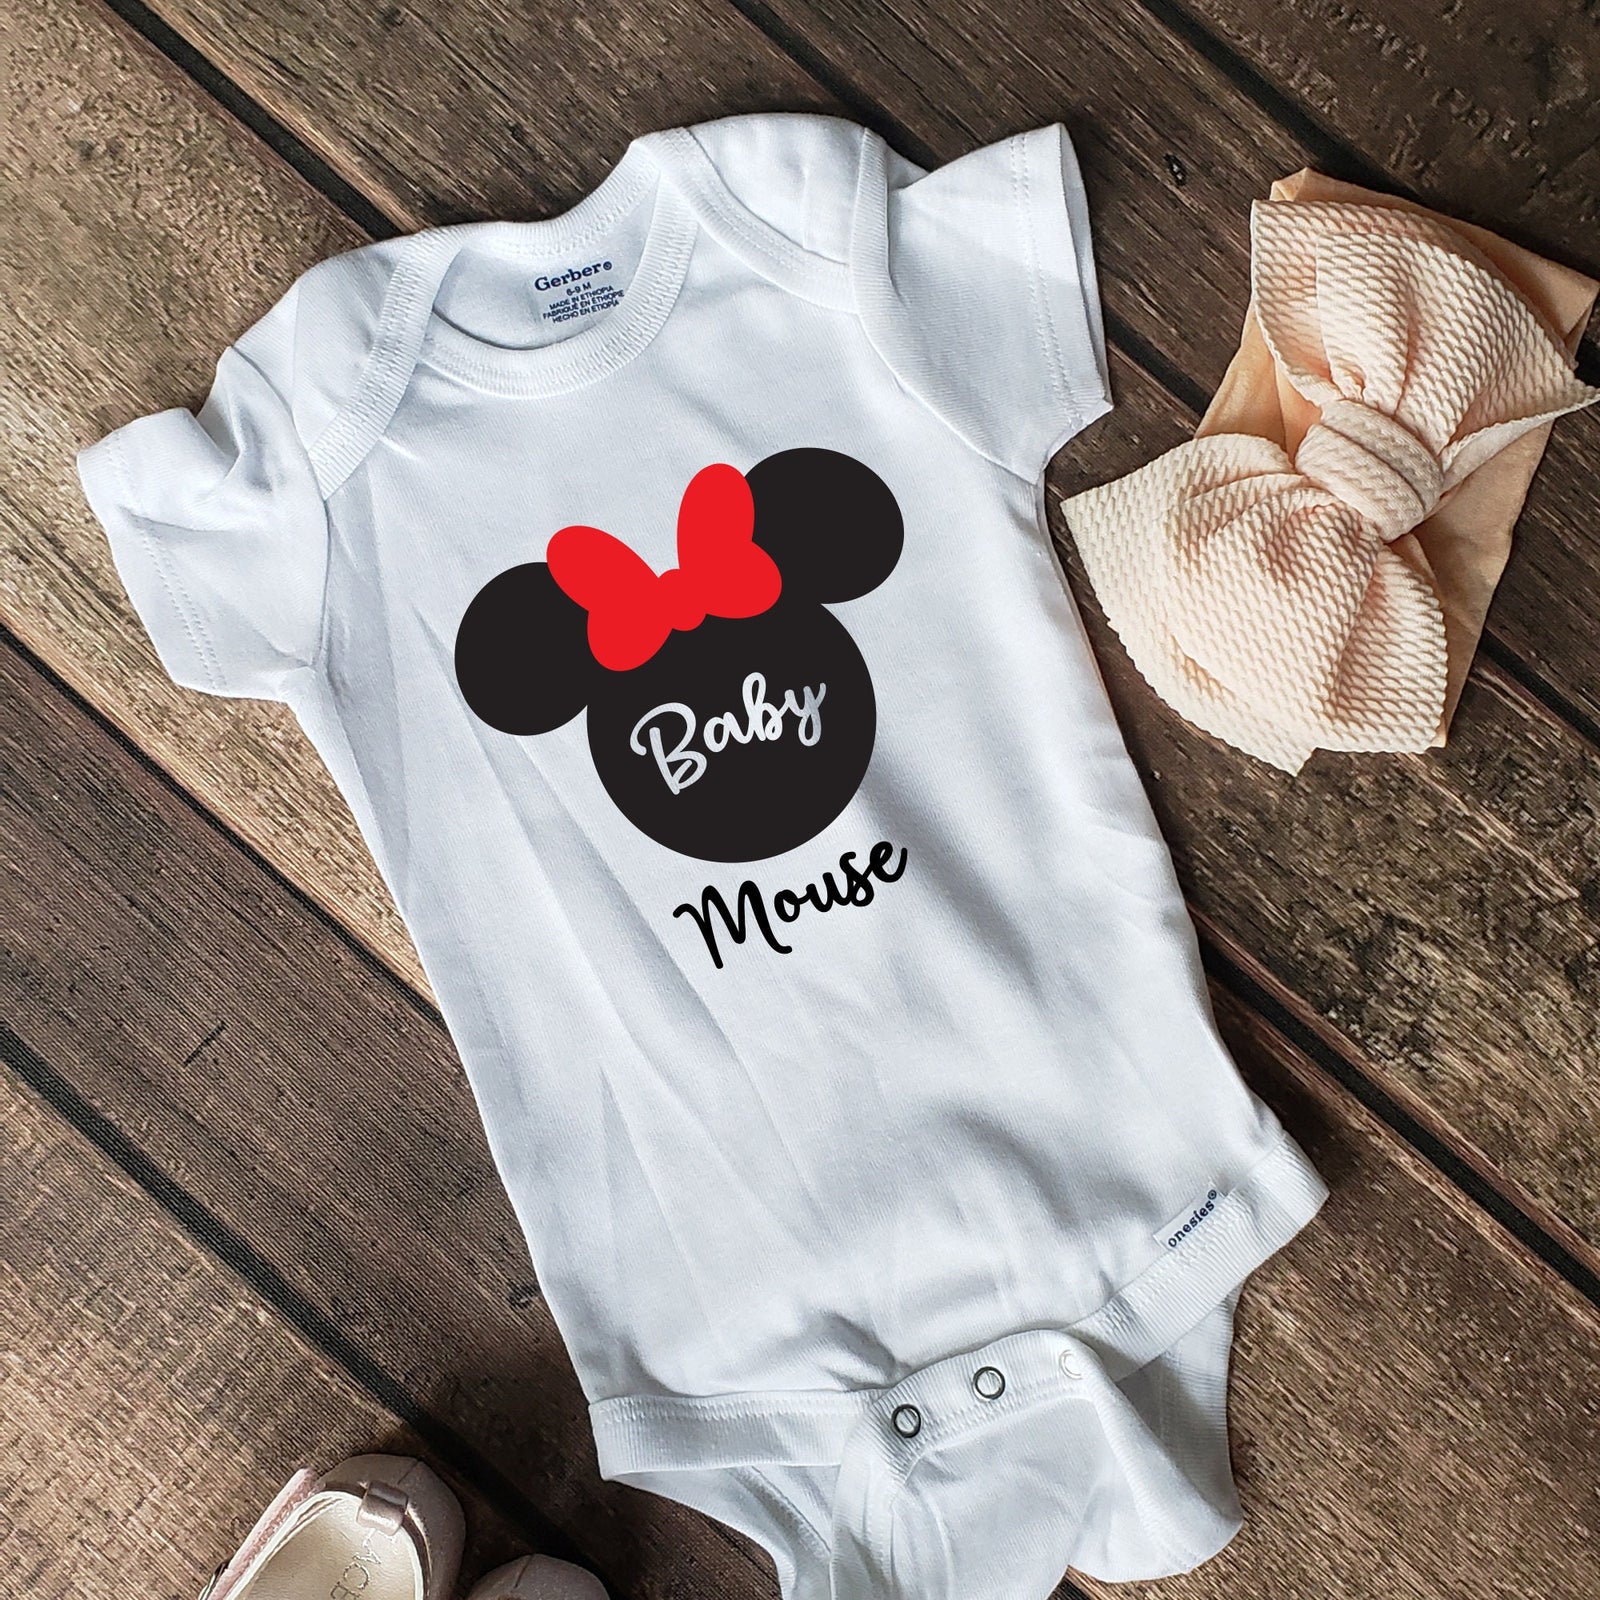 Baby Minnie Mouse -  Infant Onesie - First Time Visit - Family Matching T Shirts